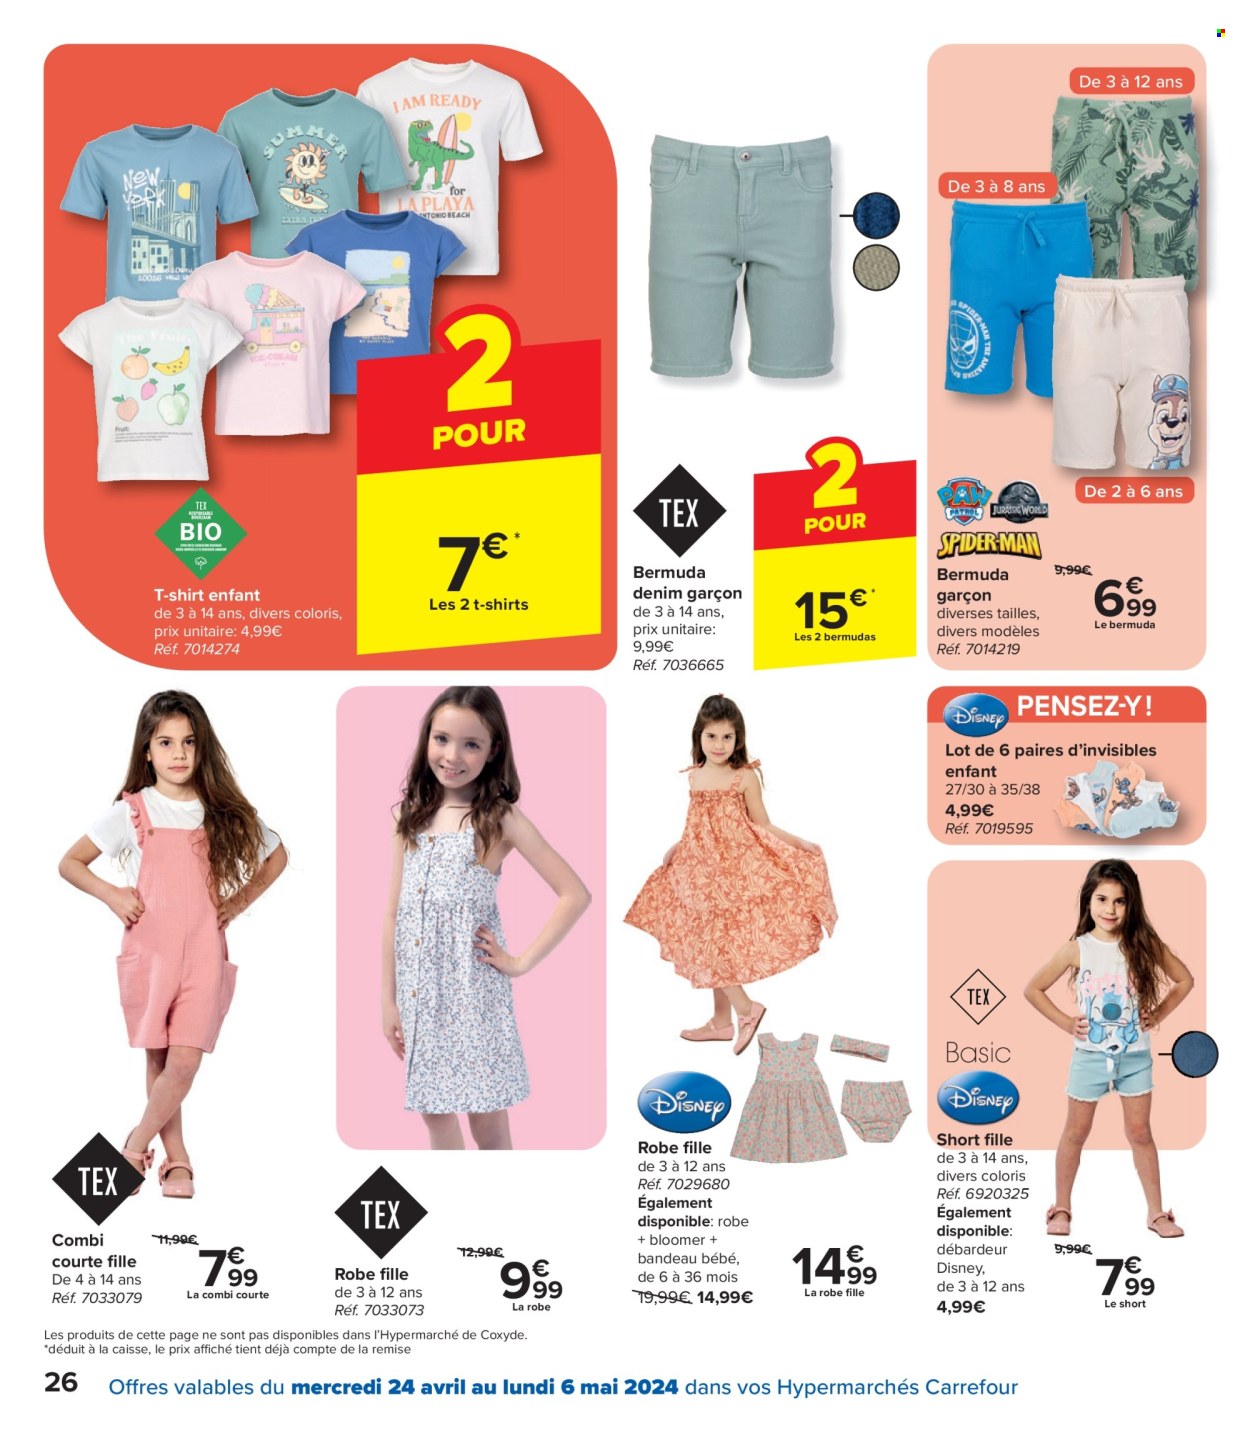 Catalogue Carrefour hypermarkt - 24.4.2024 - 6.5.2024. Page 26.